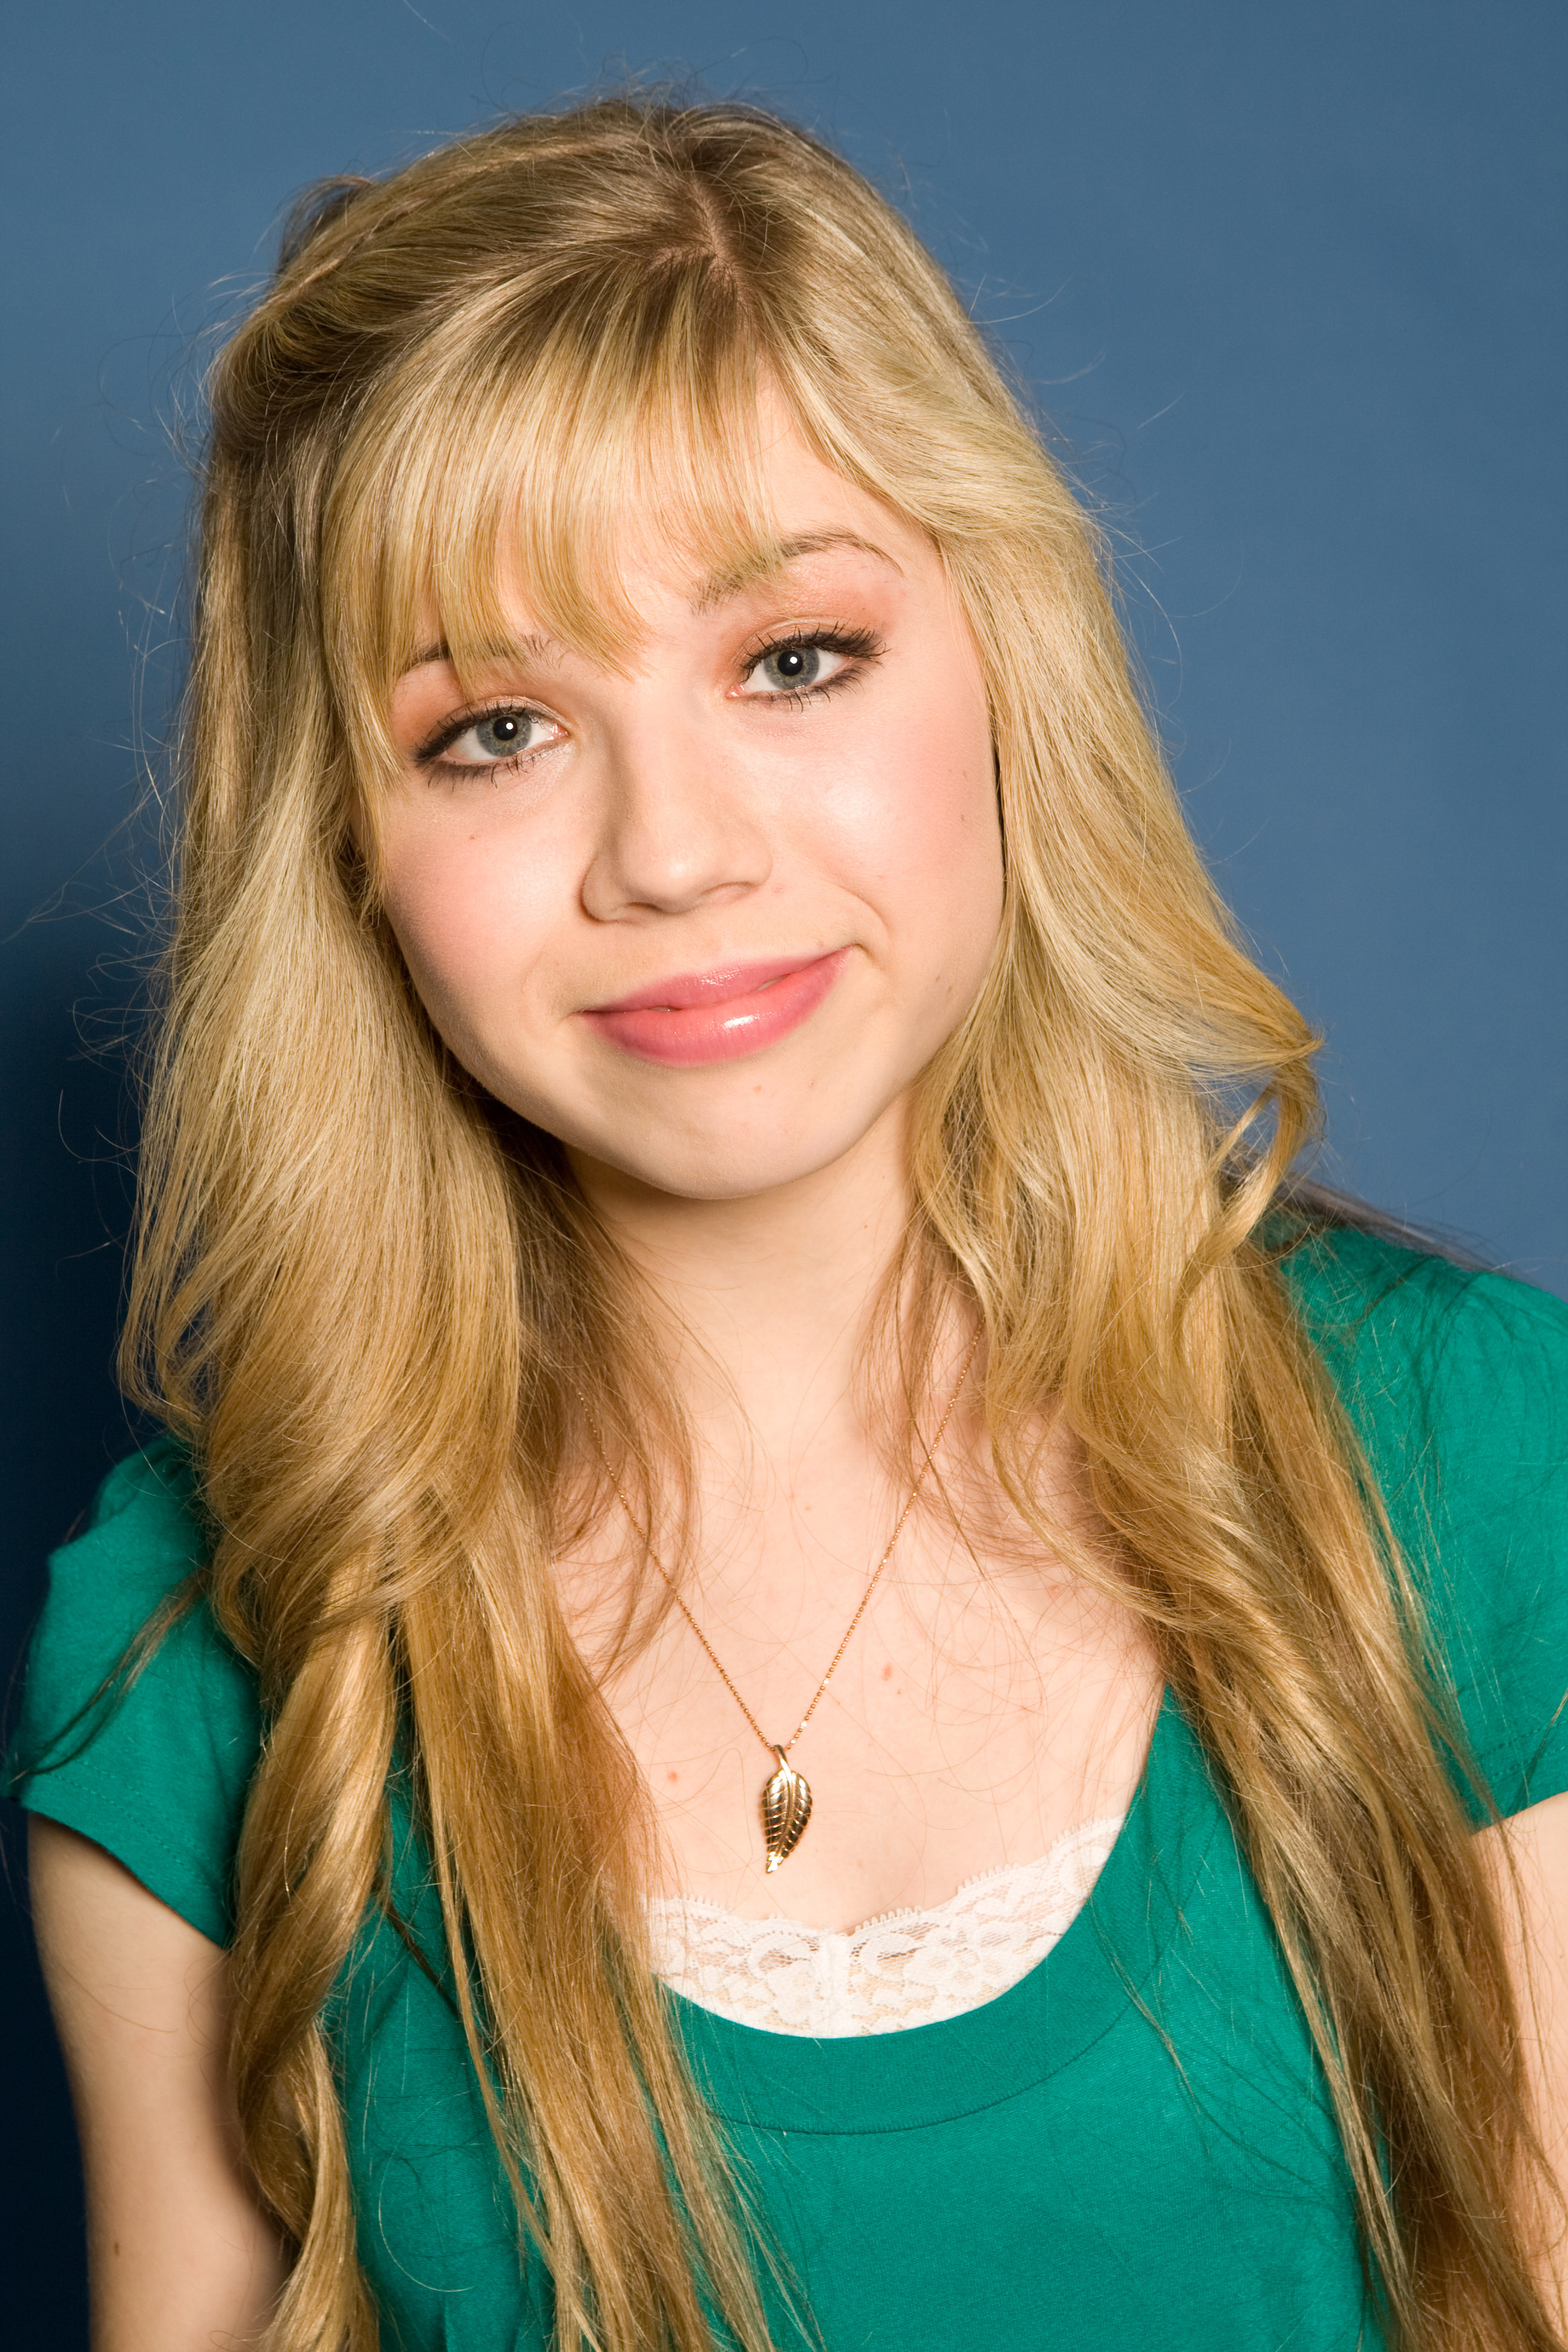 Jennette McCurdy besucht die 62. Annual Mother Goose Parade's Pre-Event "Evening With The Stars" am 22. November 2008 | Quelle: Getty Images